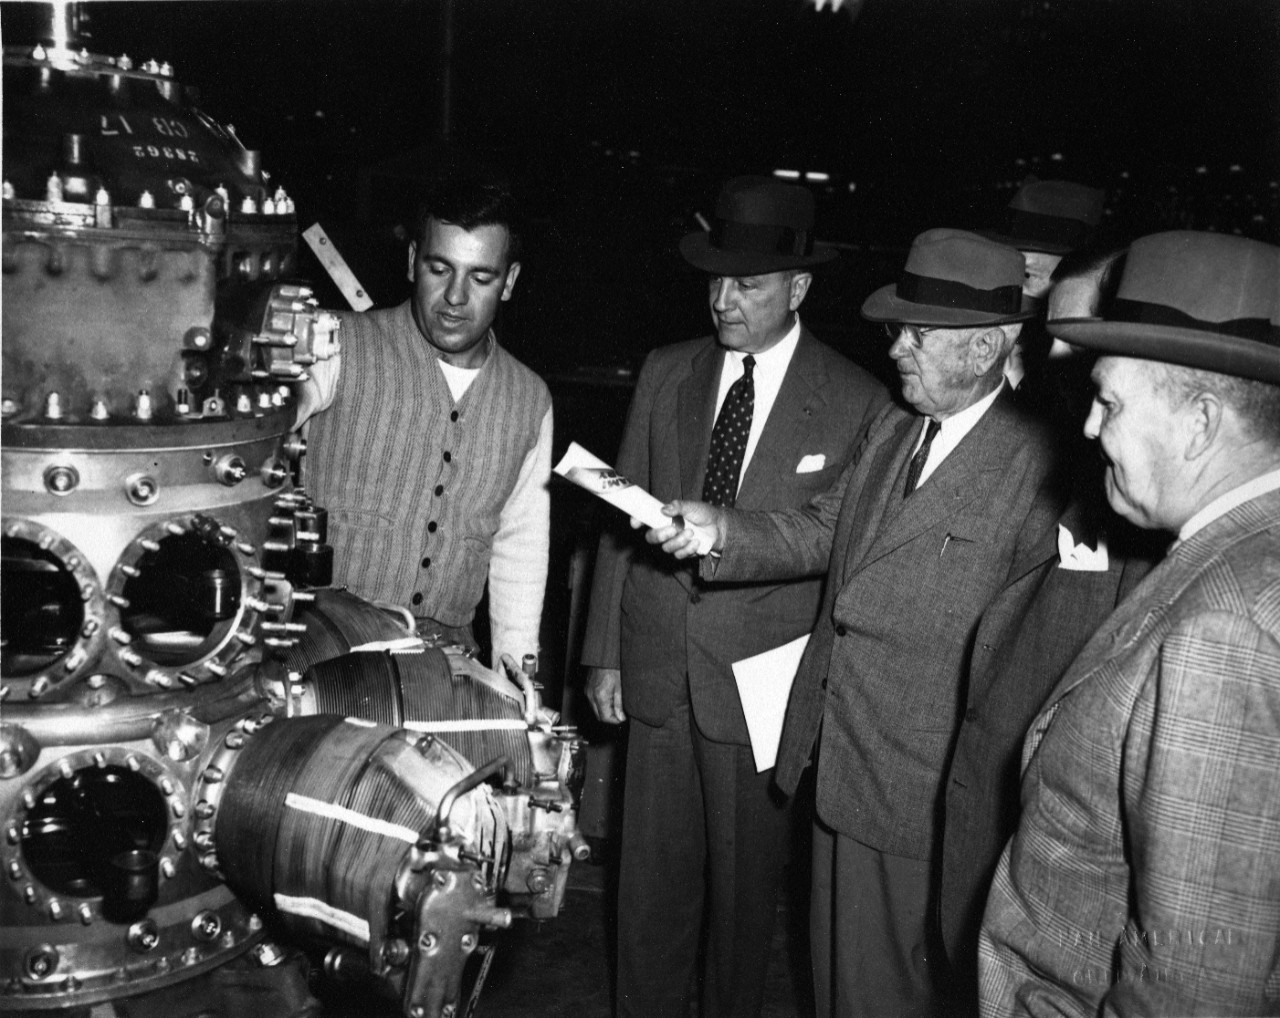 Admiral William H. Standley, USN (Ret) (at center, pointing) tours a Pan American World Airways facility, likely in Miami. Original photo by Pan American World Airways Public Relations.